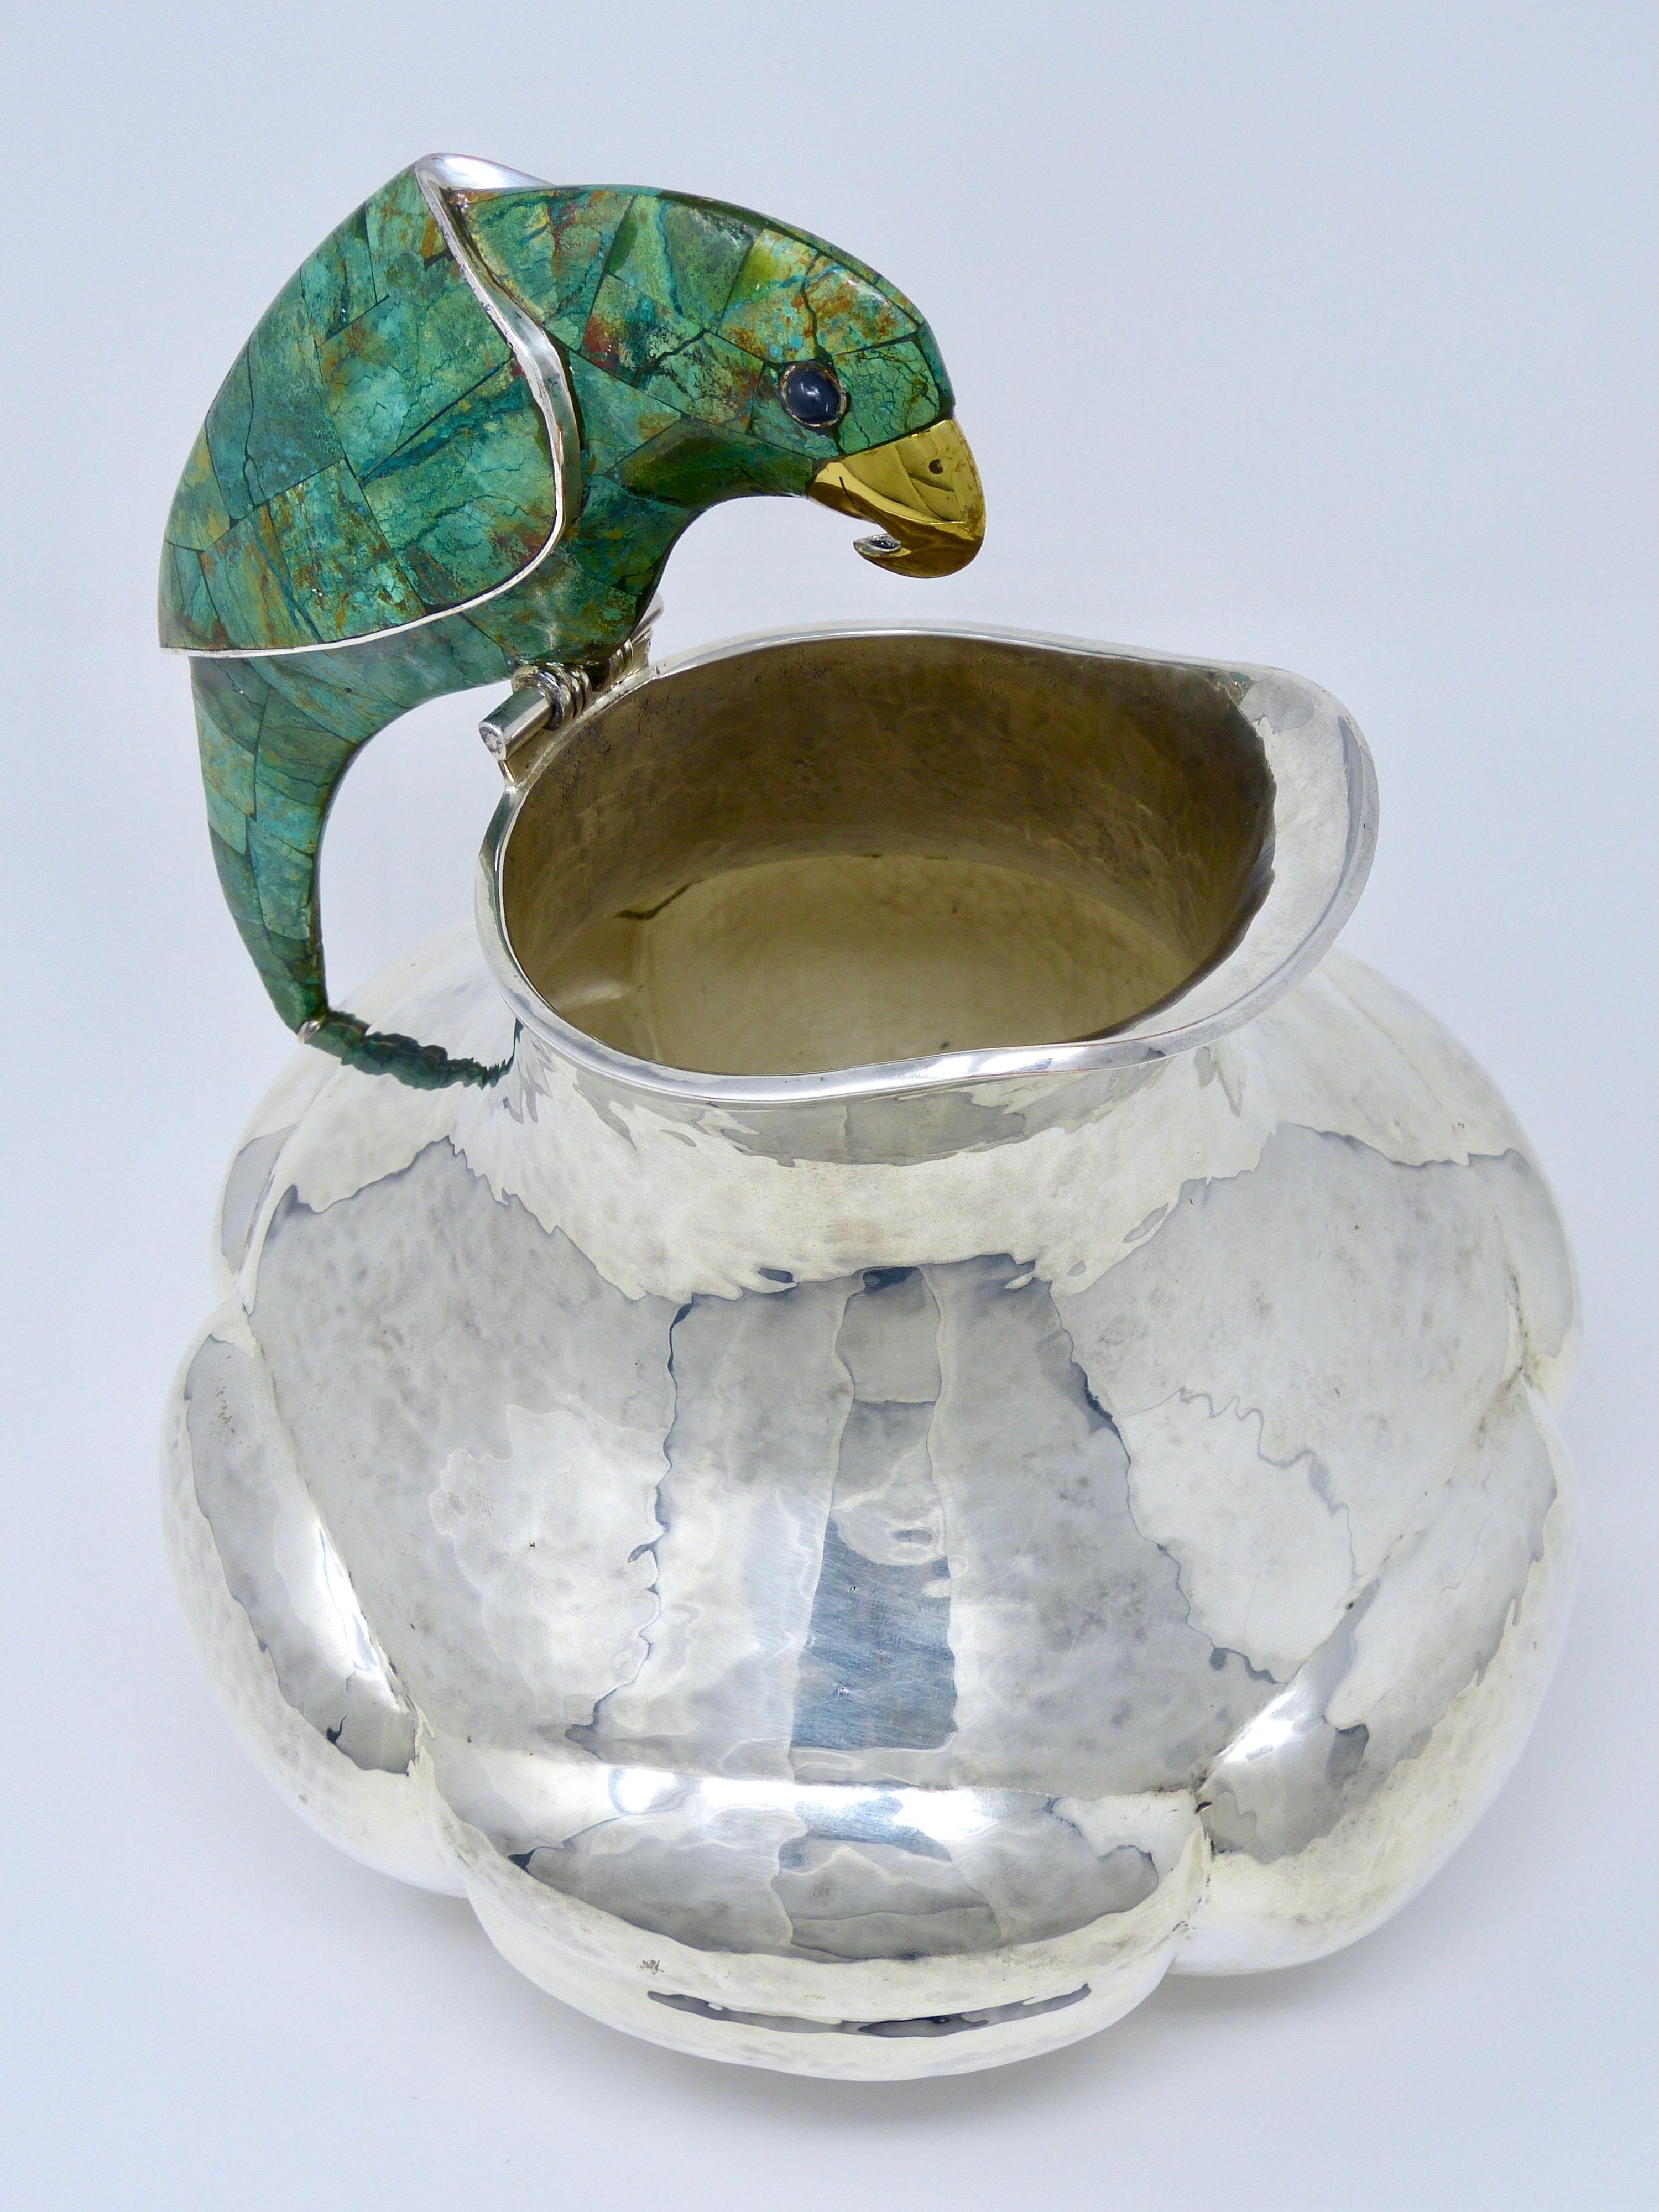 Emilia Castillo Silver Plated and Malachite Water Pitcher with Parrot Taxco, Mx 1